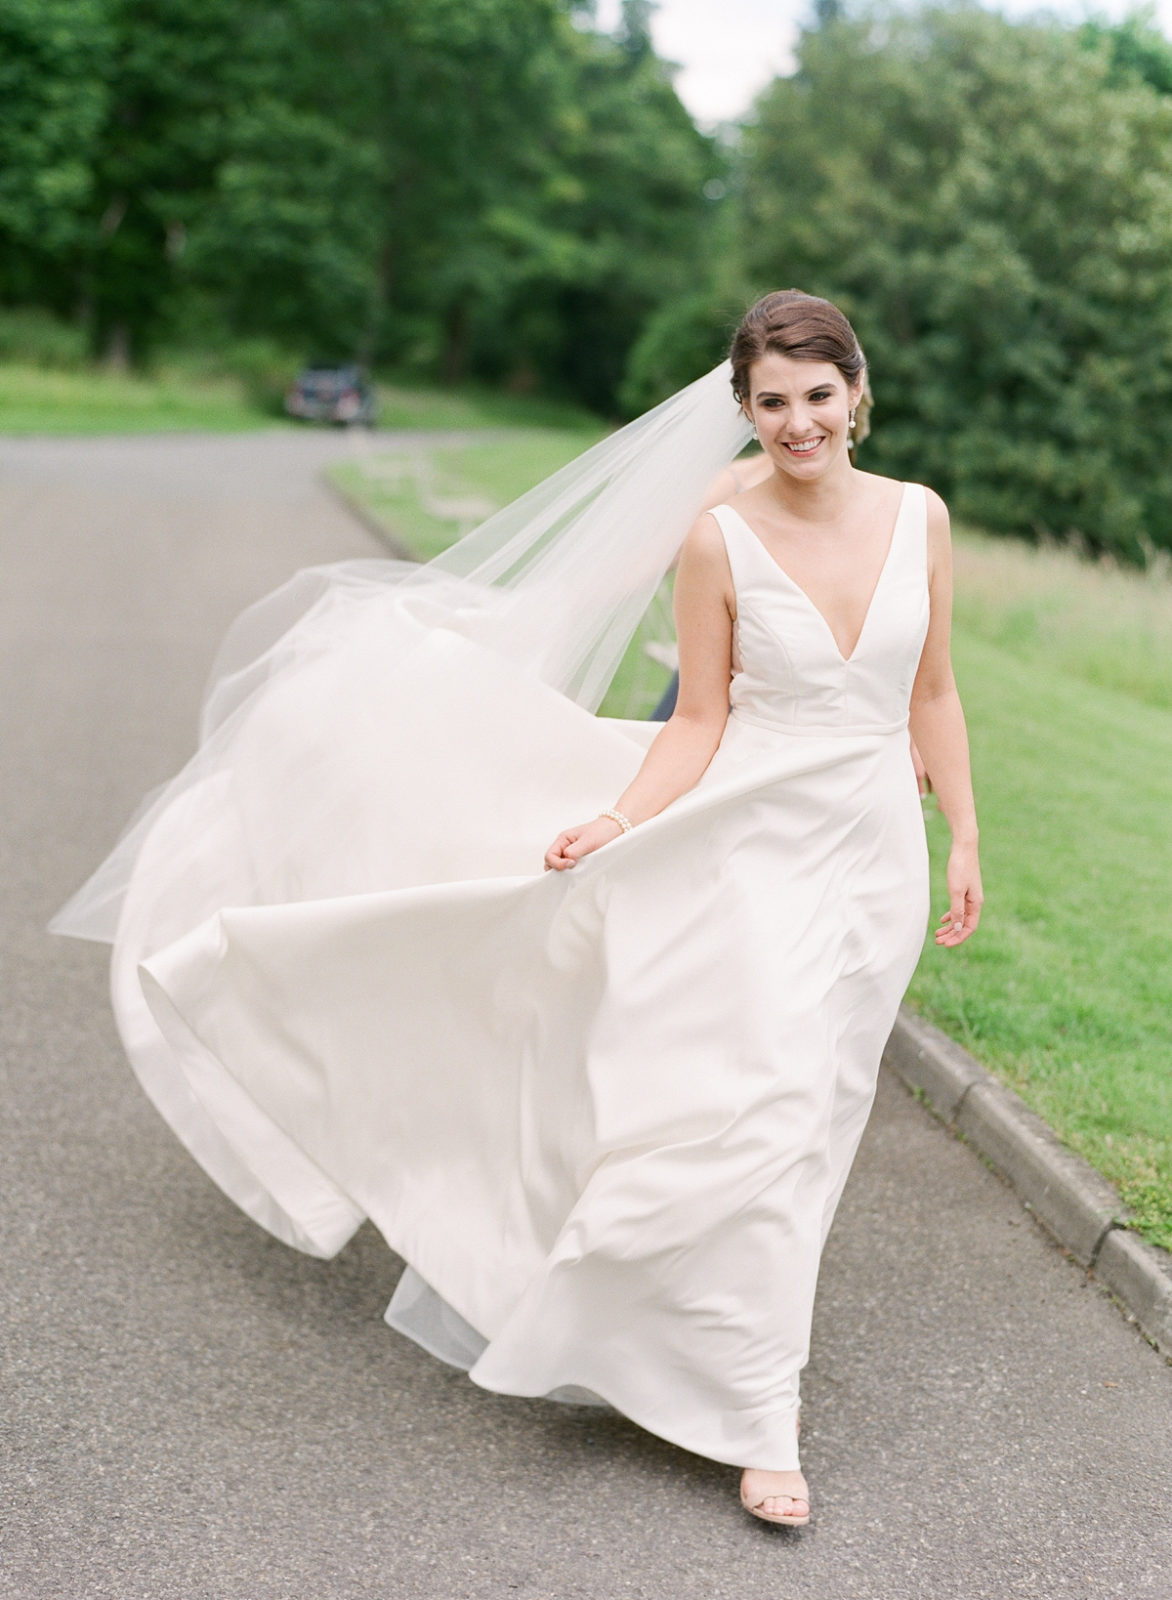 Ireland Film Photographer | Molly Carr Photography | Bride Walking in White Jenny Yoo Wedding Dress Blowing in the Wind